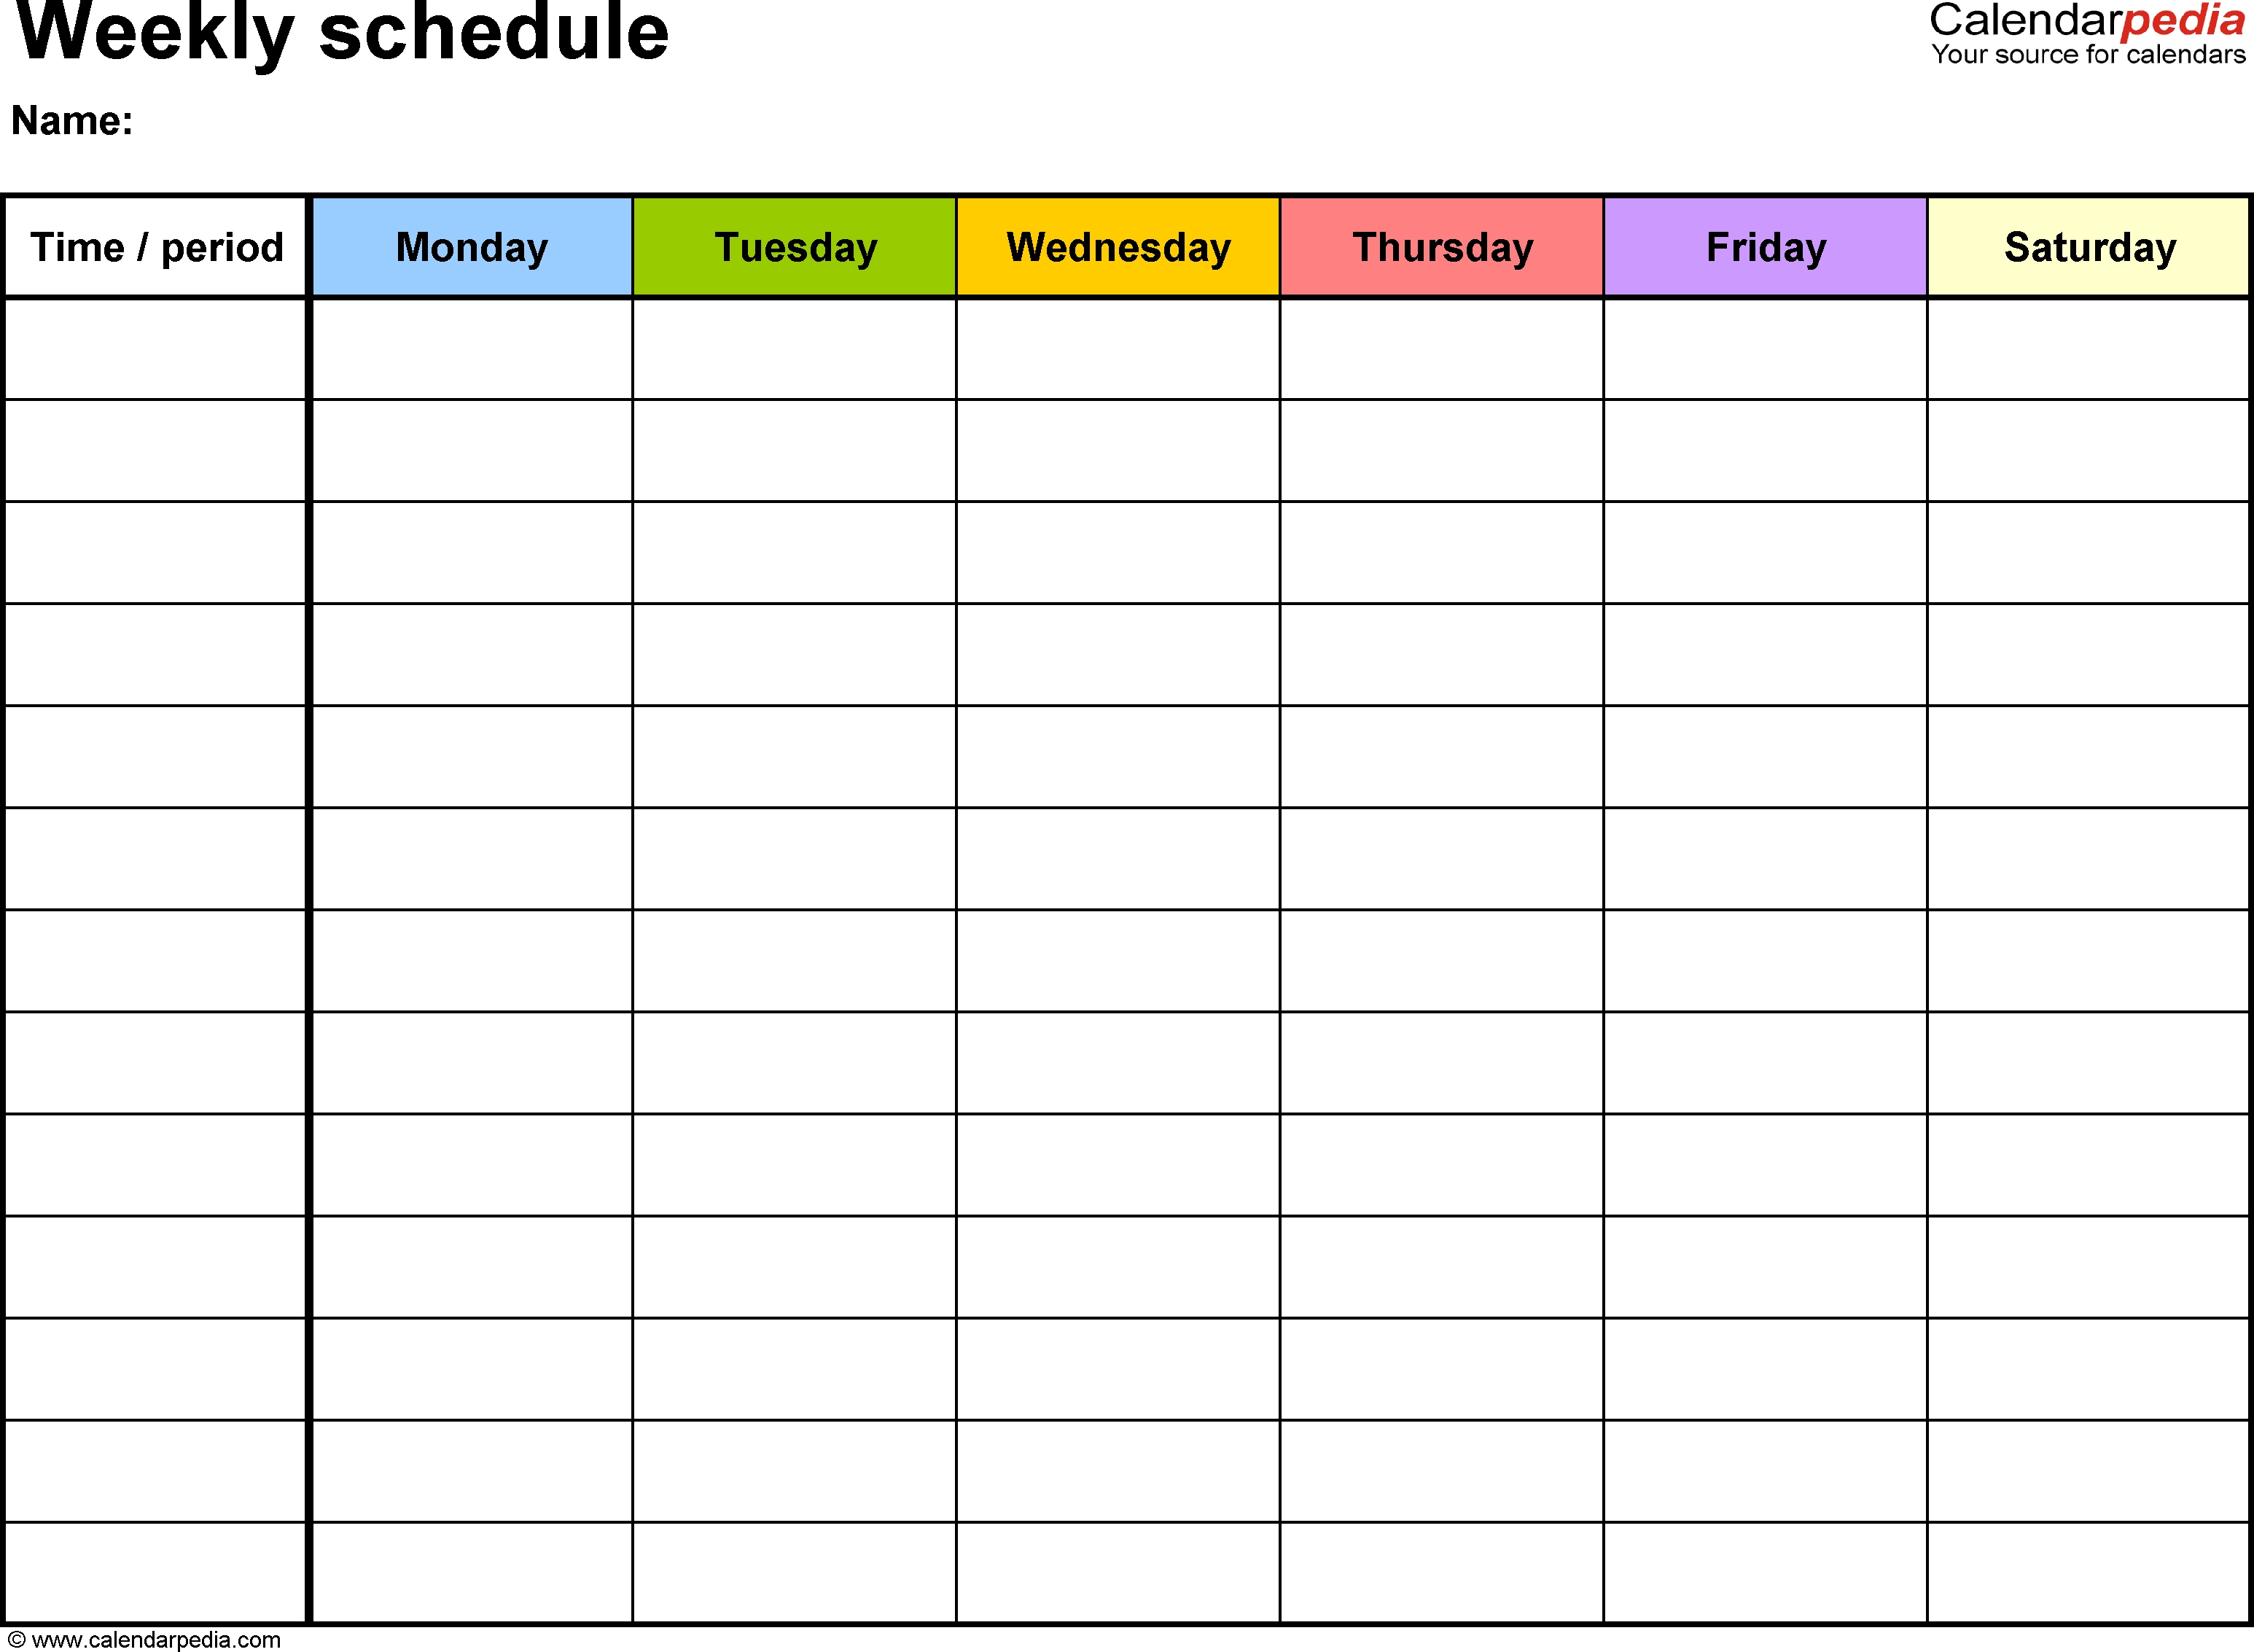 Free Weekly Schedule Templates For Word - 18 Templates with 6 Week Blank Calendar Template